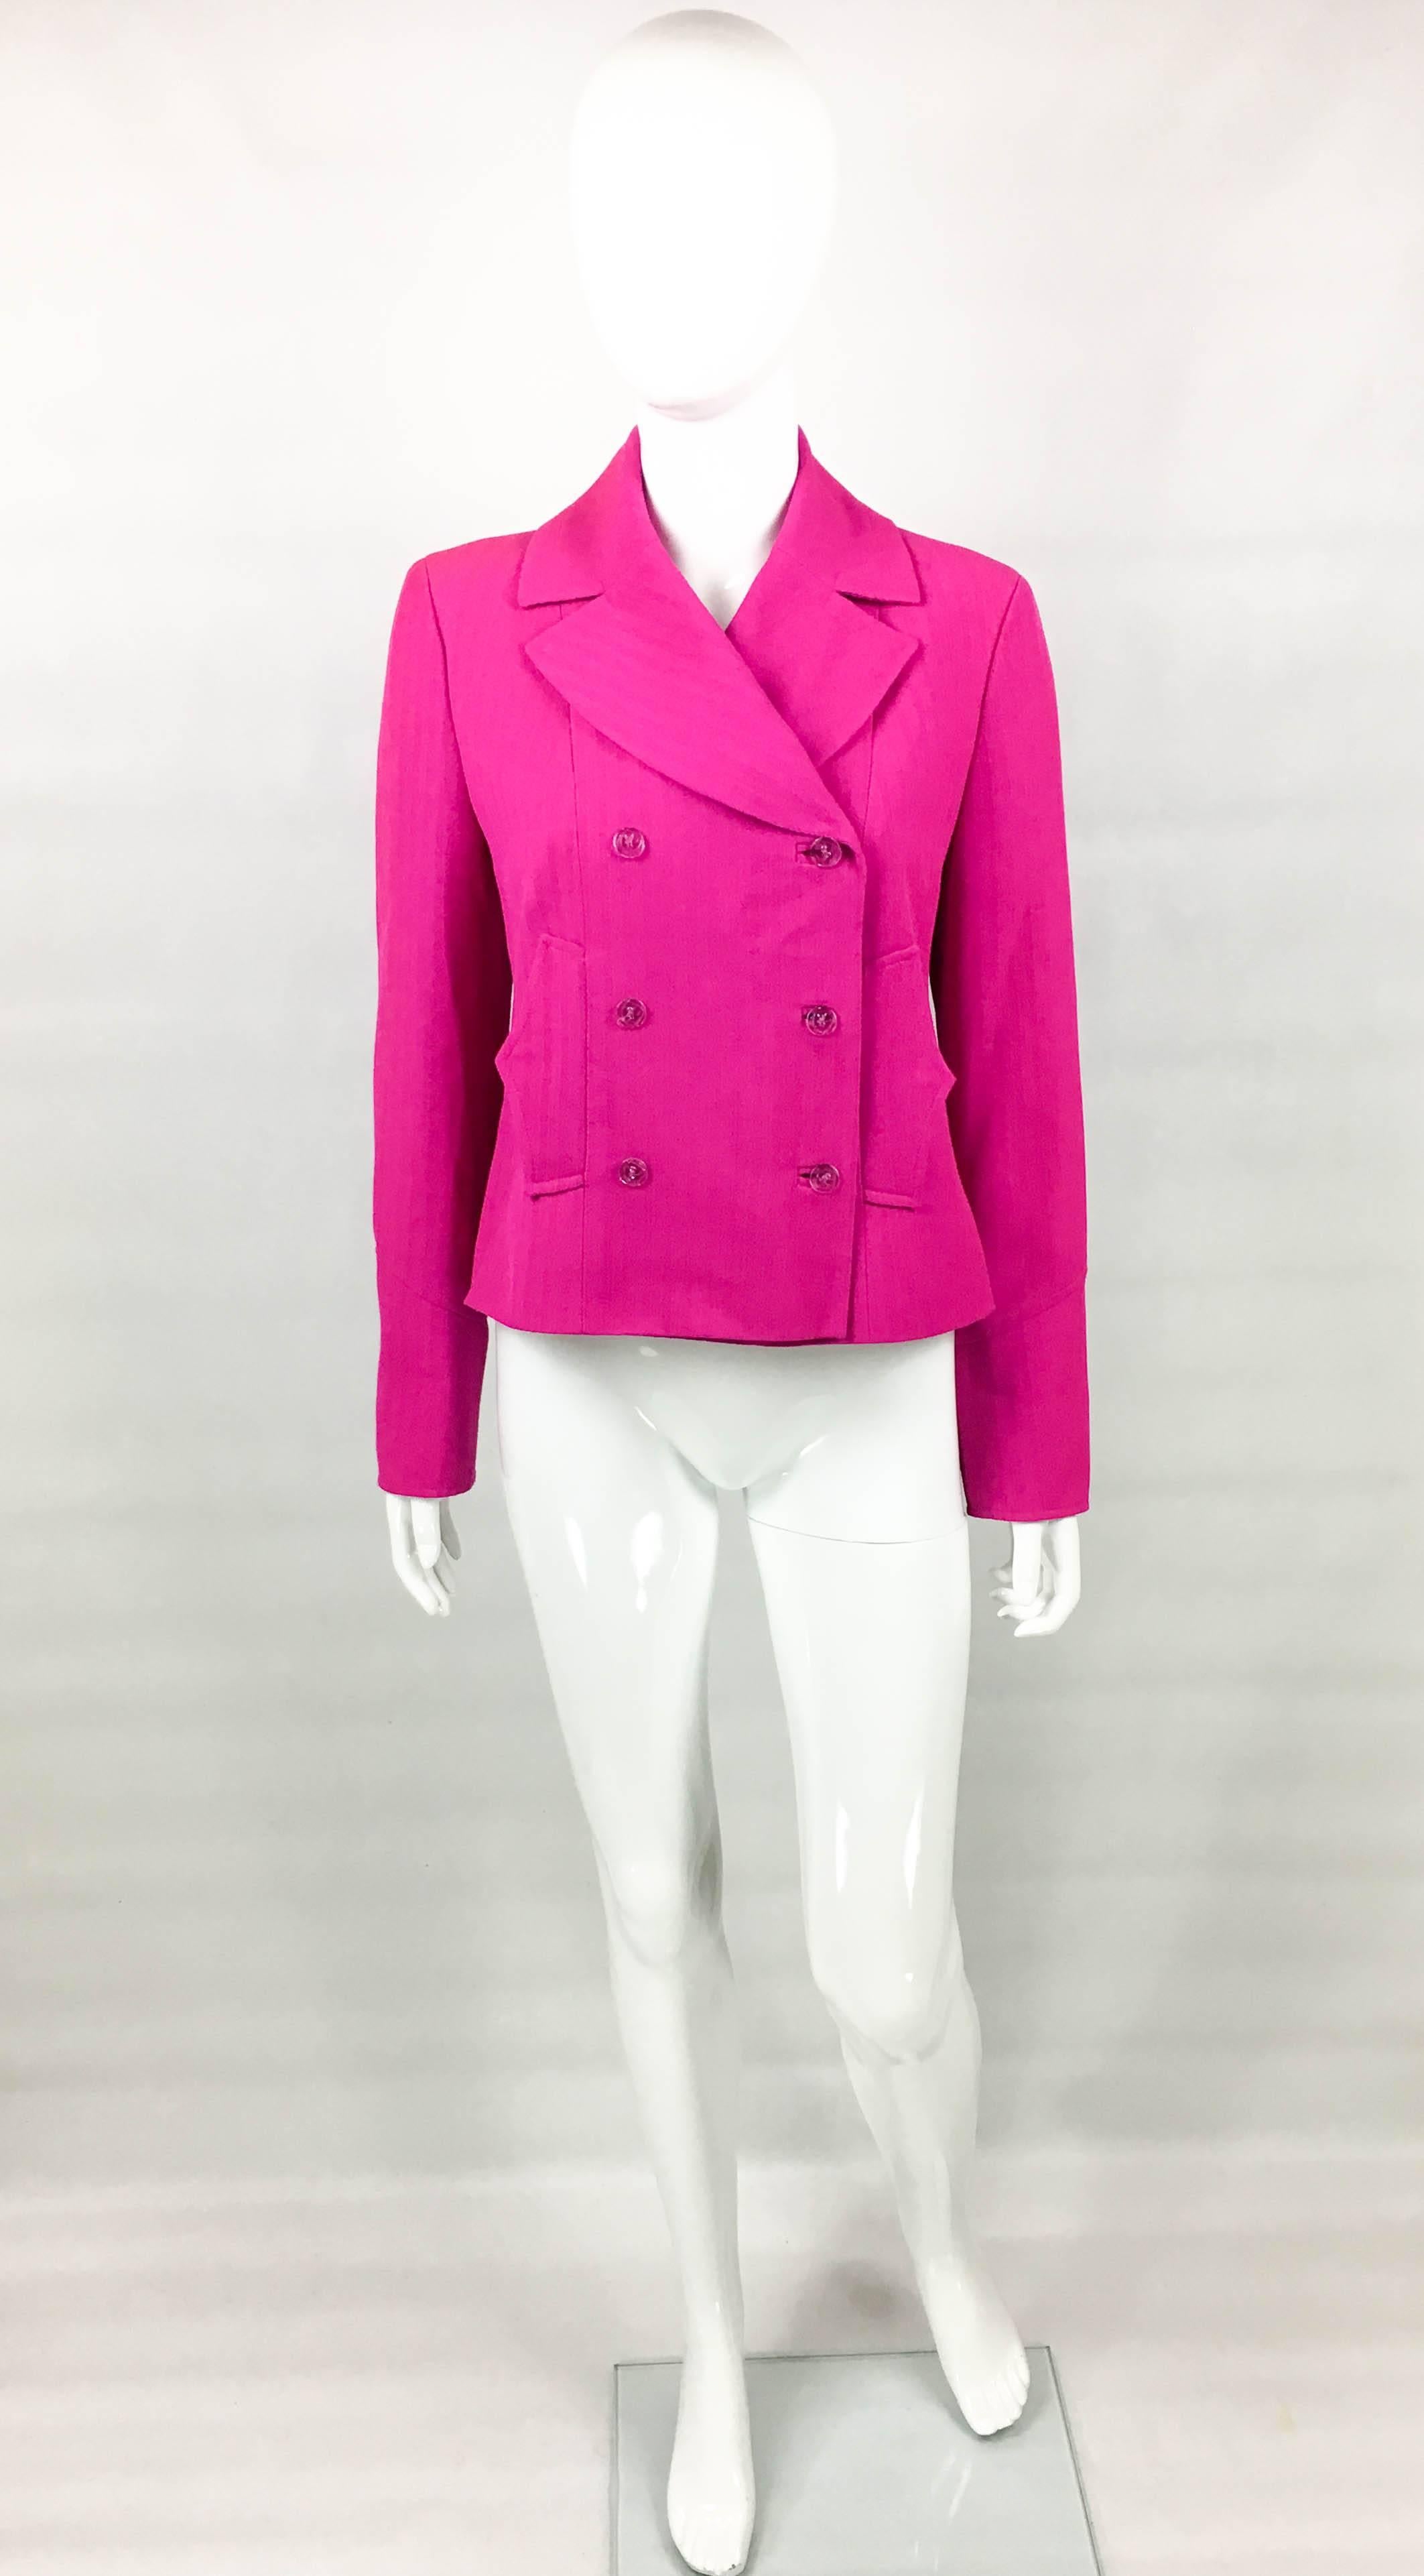 Vintage Lacroix Fuchsia Jacket. This striking jacket by Christian Lacroix dates back from the 1990’s. Made in shocking pink wool, it is packed with the glamour and attitude that is peculiar to Lacroix creations. The transparent acrylic buttons